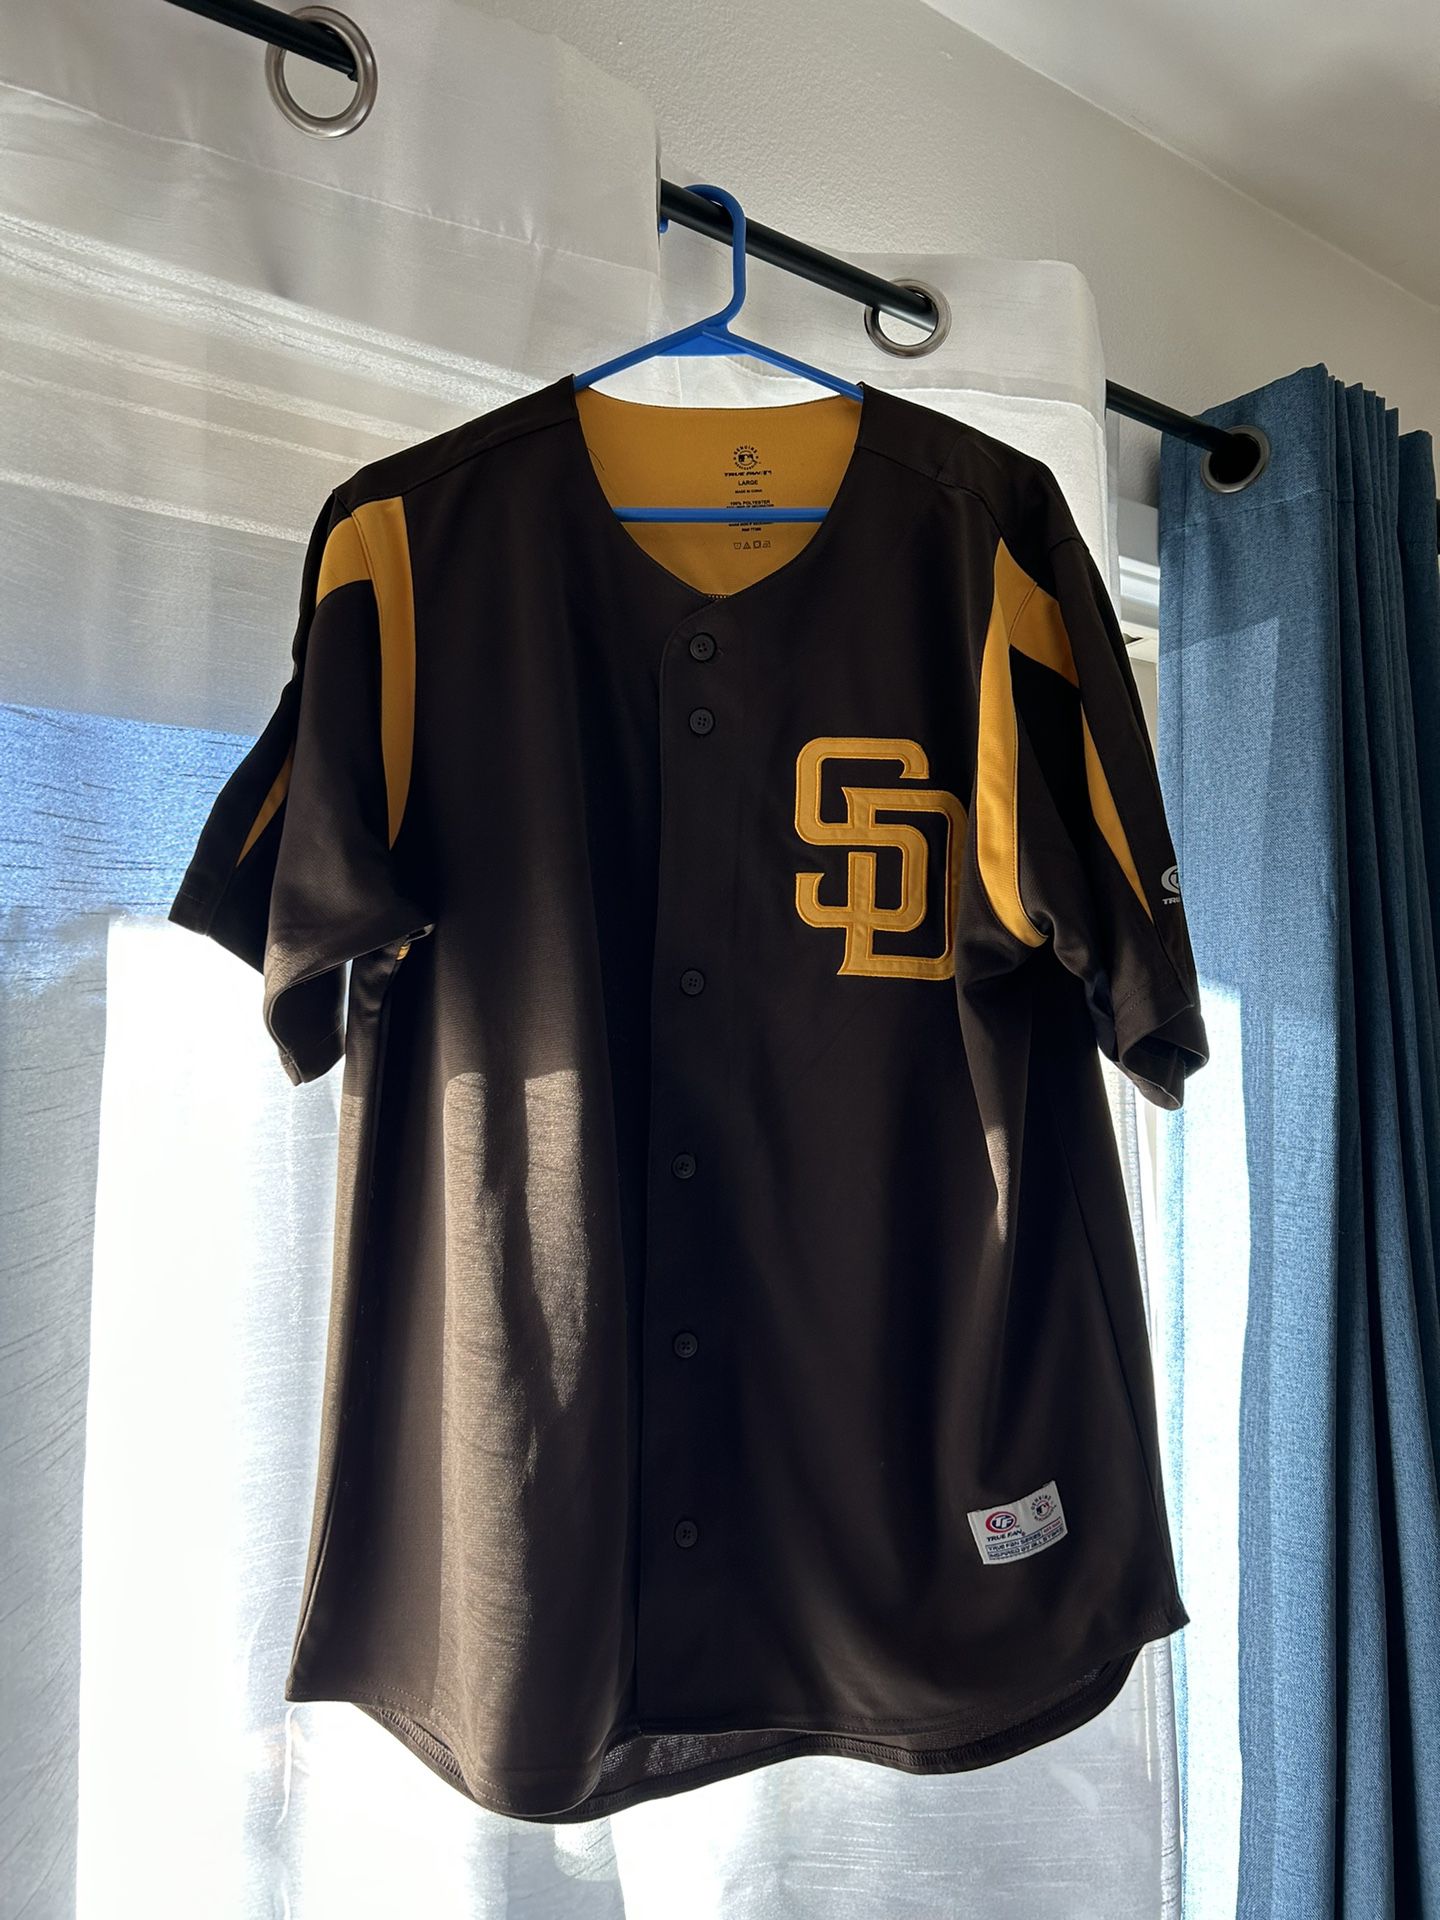 Men's San Diego Padres Jersey for Sale in Carlsbad, CA - OfferUp